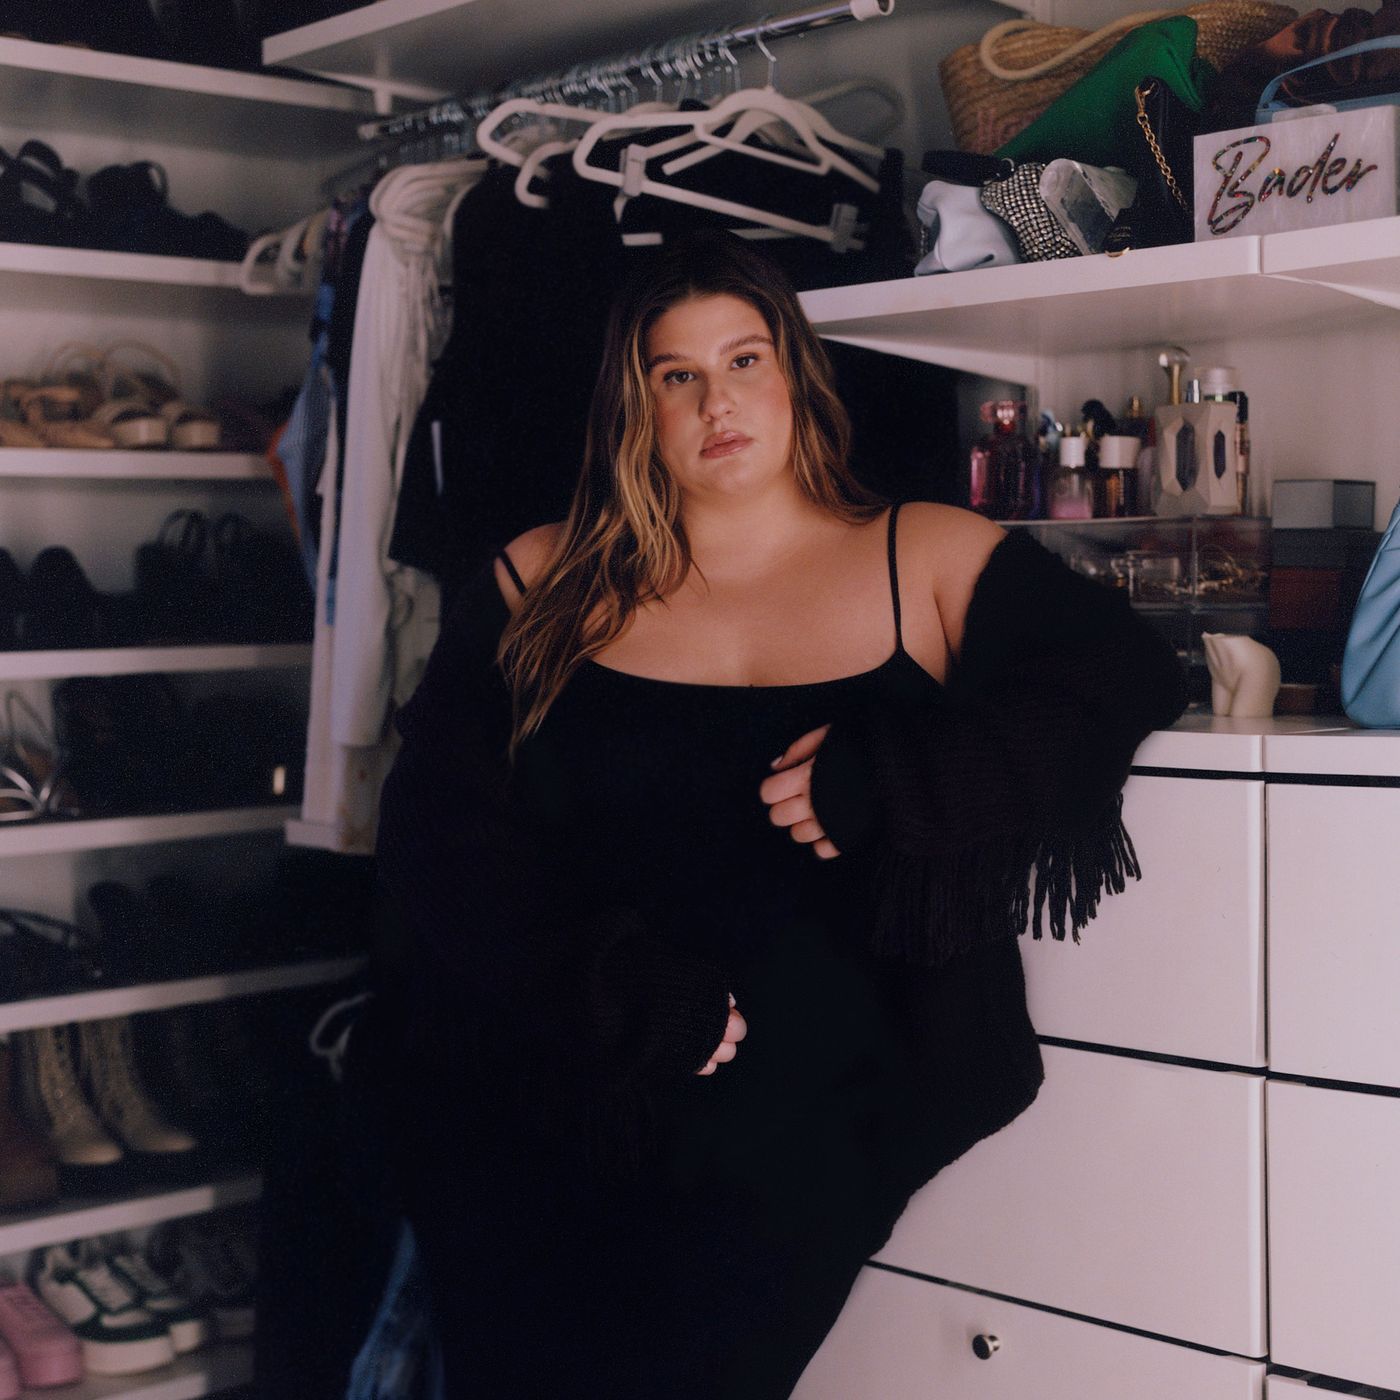 Plus-Size' Model Posts Side-by-Side Pics With Victoria's Secret Ads